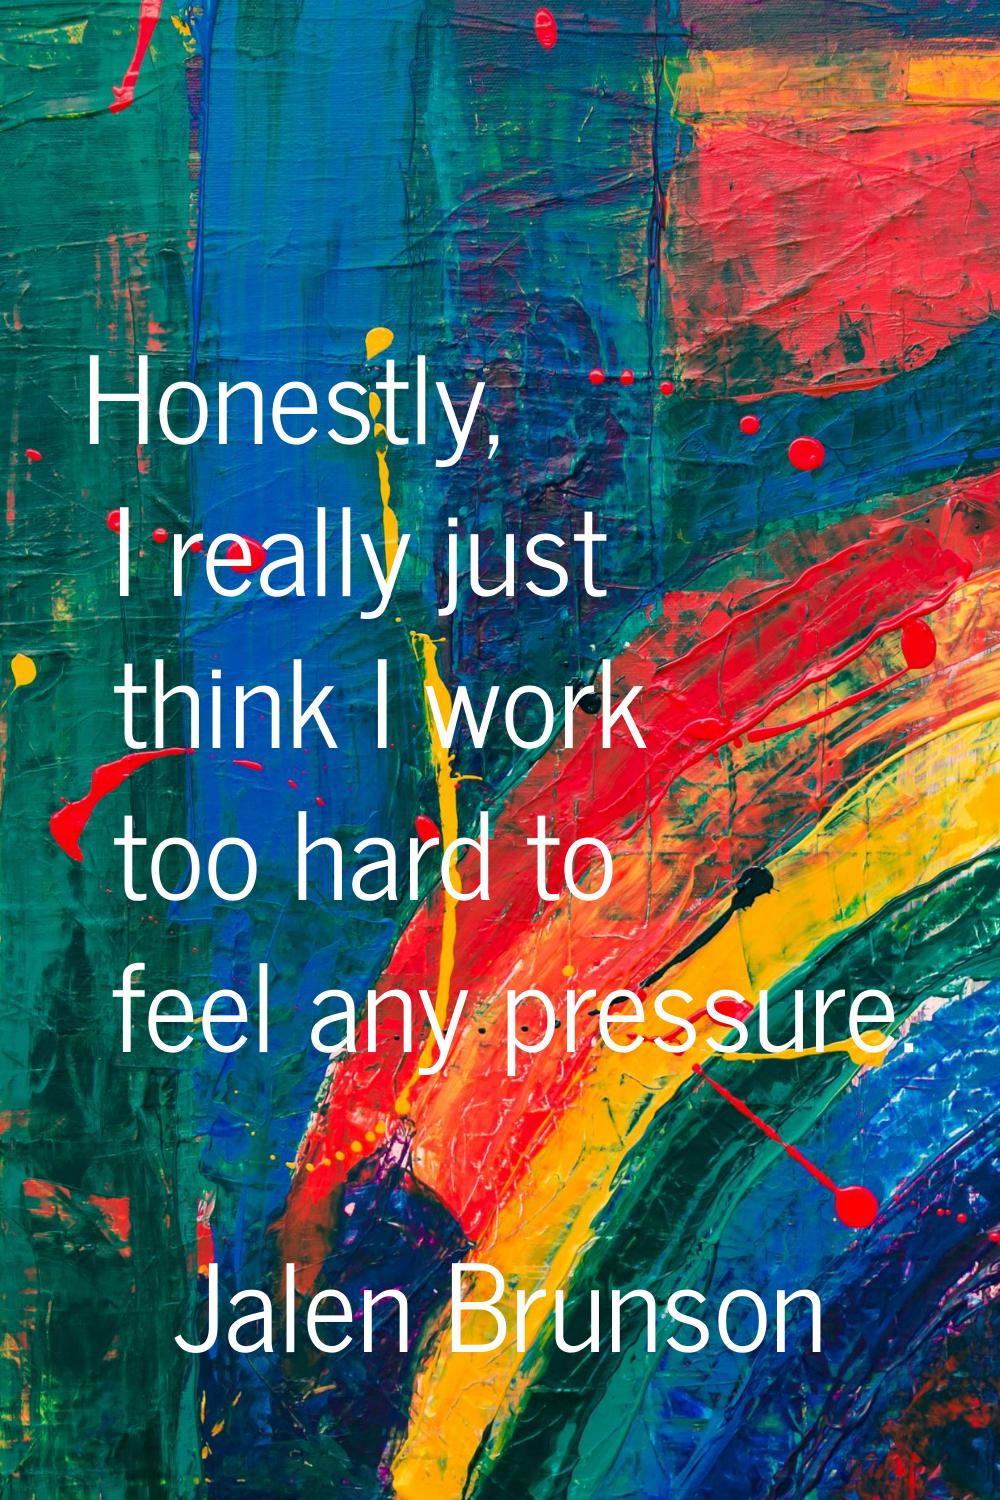 Honestly, I really just think I work too hard to feel any pressure.